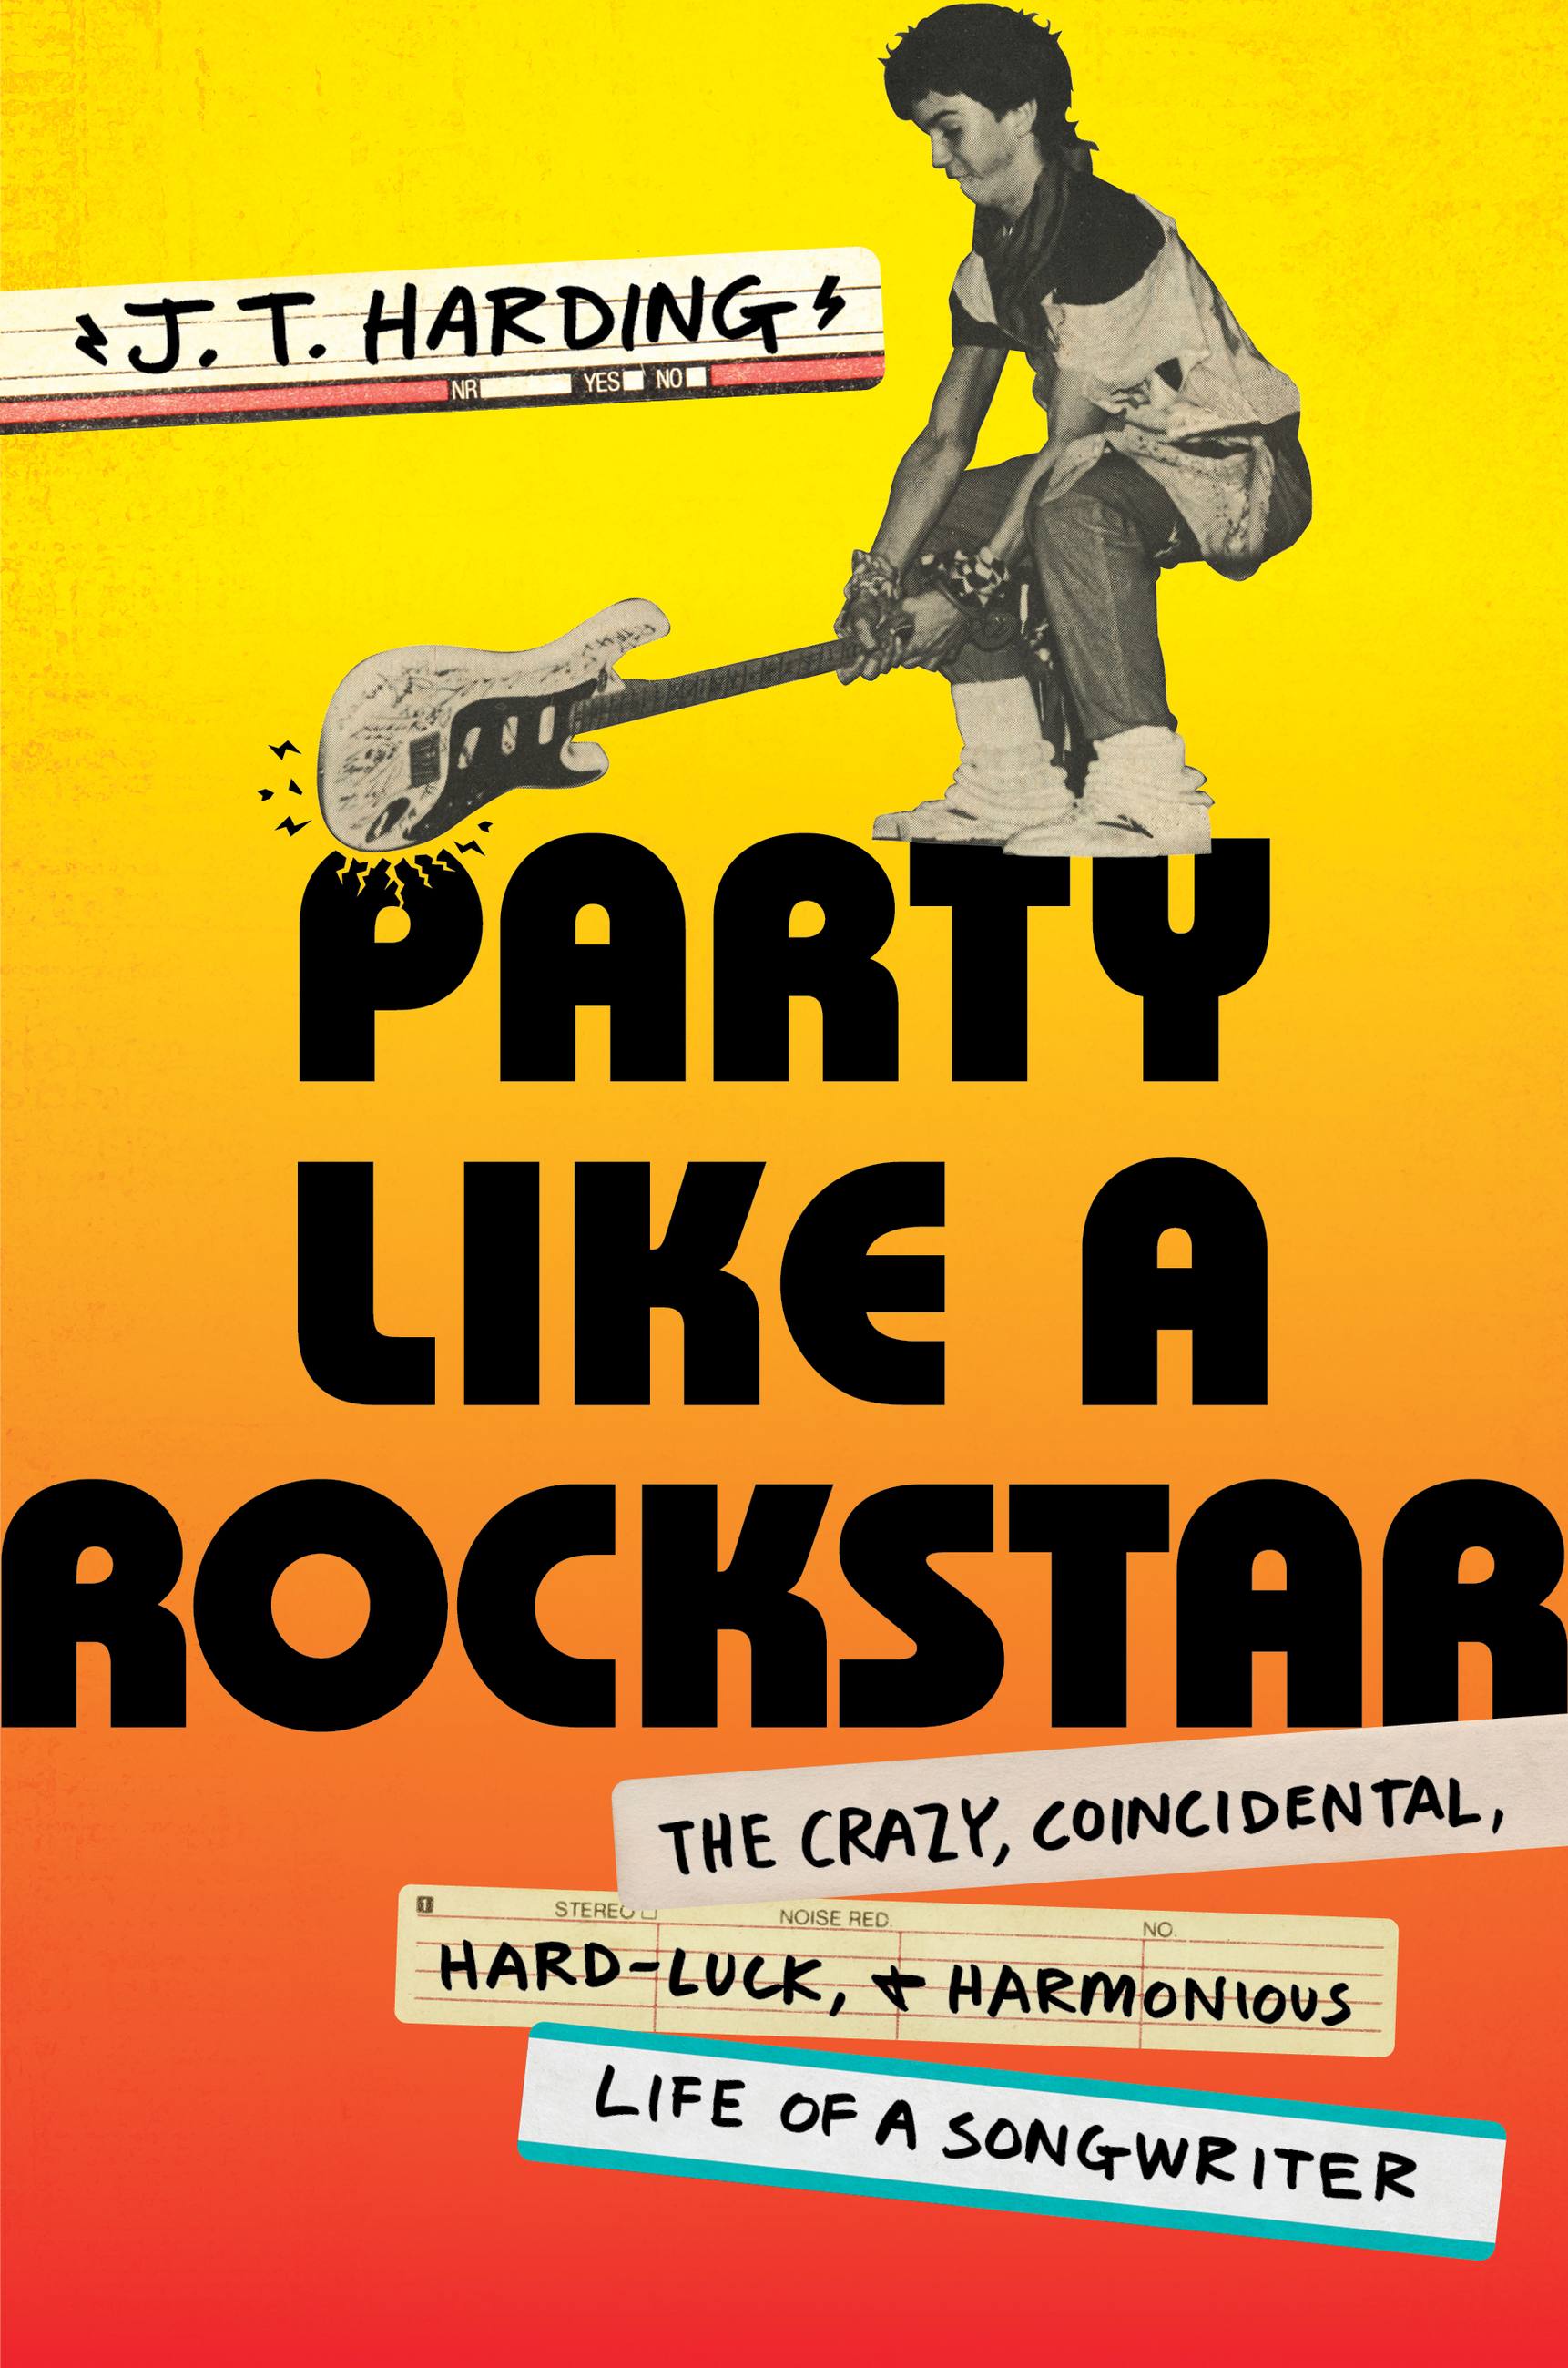 Party Like a Rockstar by Harding Hachette Book Group